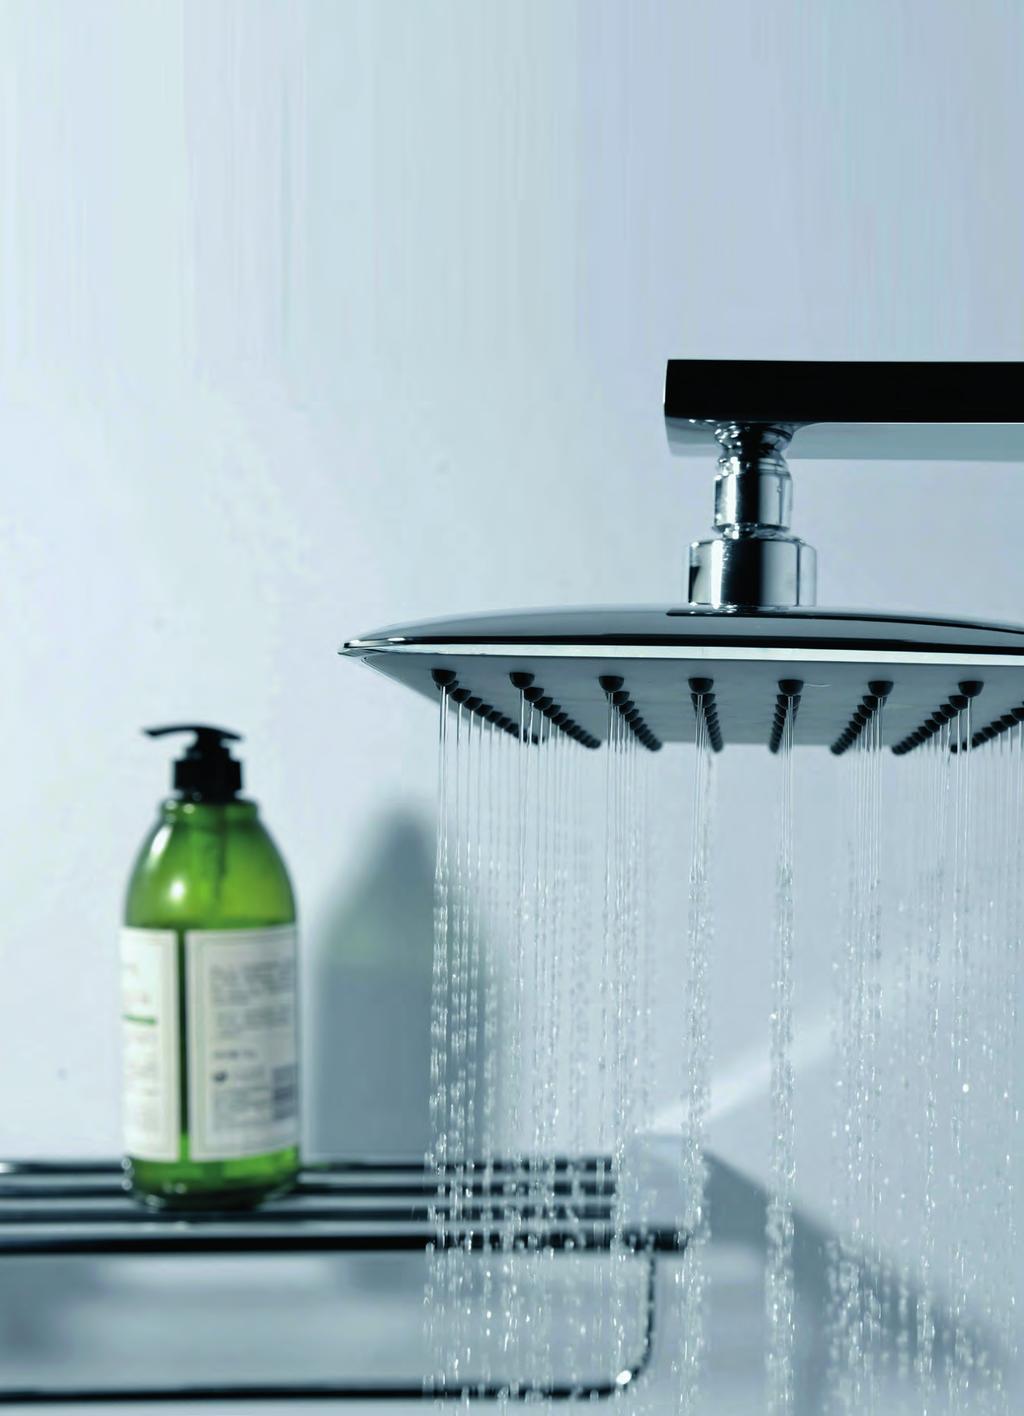 SHOWER COLLECTIONS Our functional showers can give you both a quick